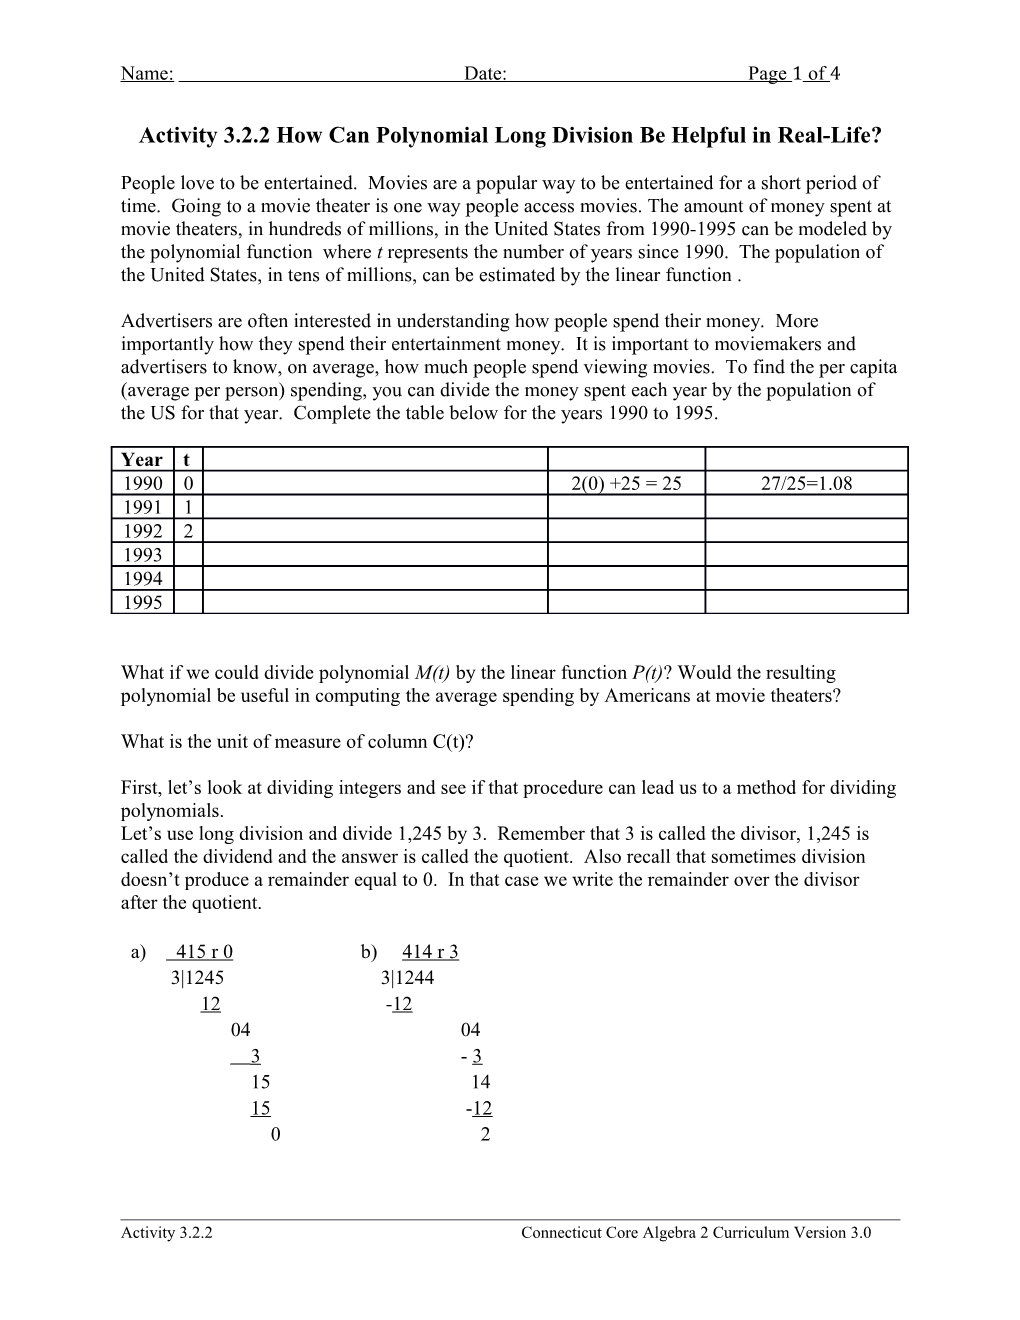 Activity 3.2.2 How Can Polynomial Long Division Be Helpful in Real-Life?